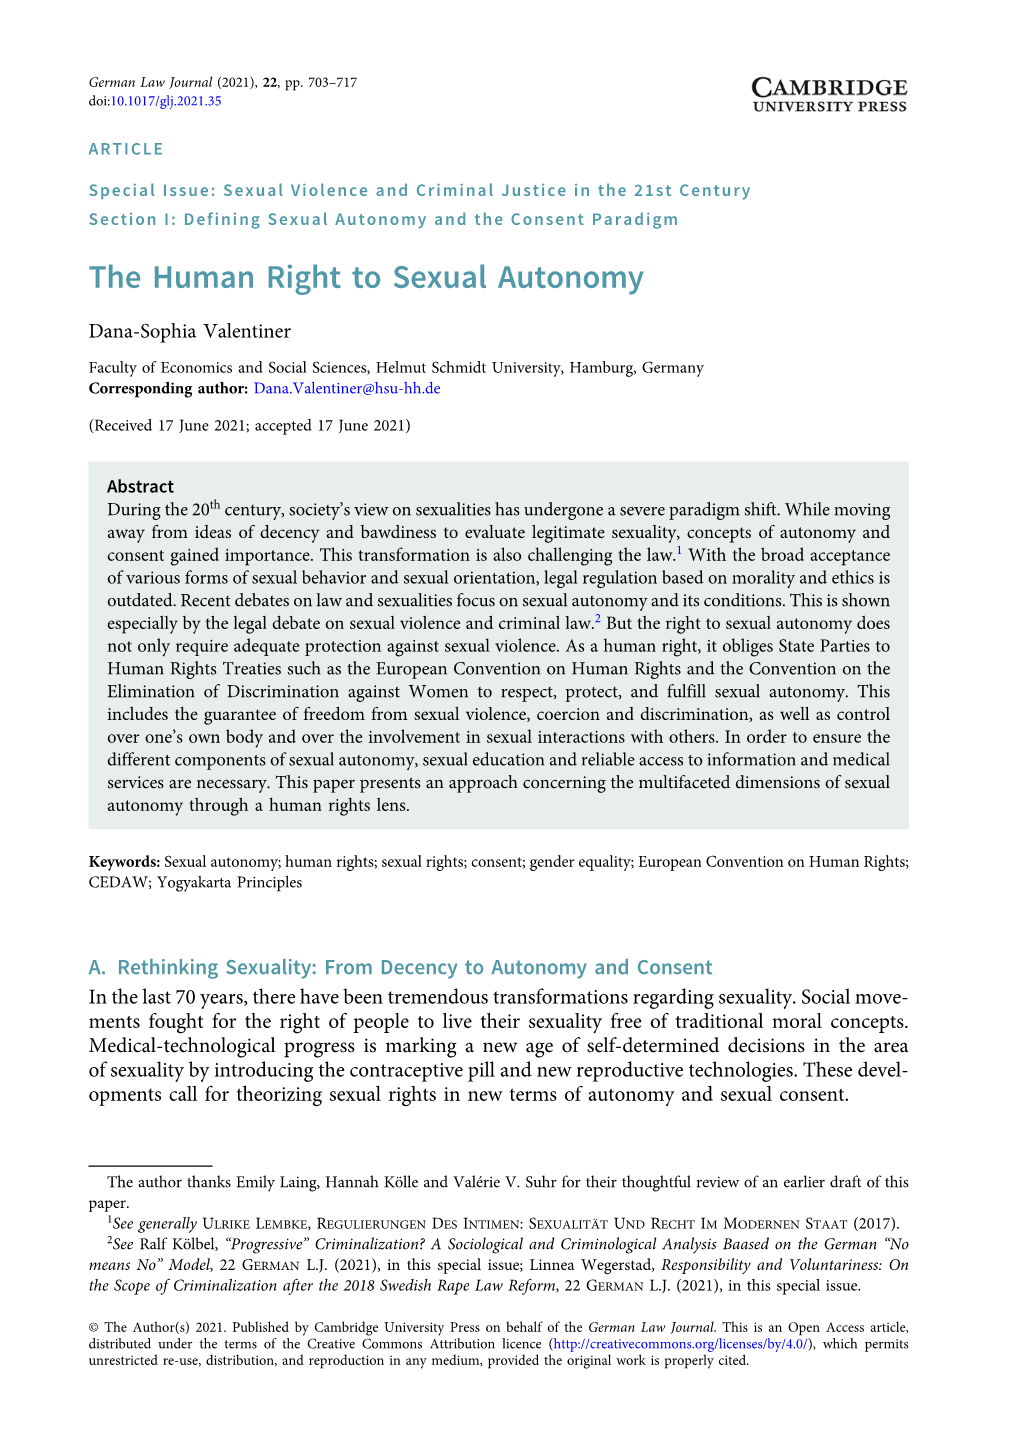 The Human Right to Sexual Autonomy